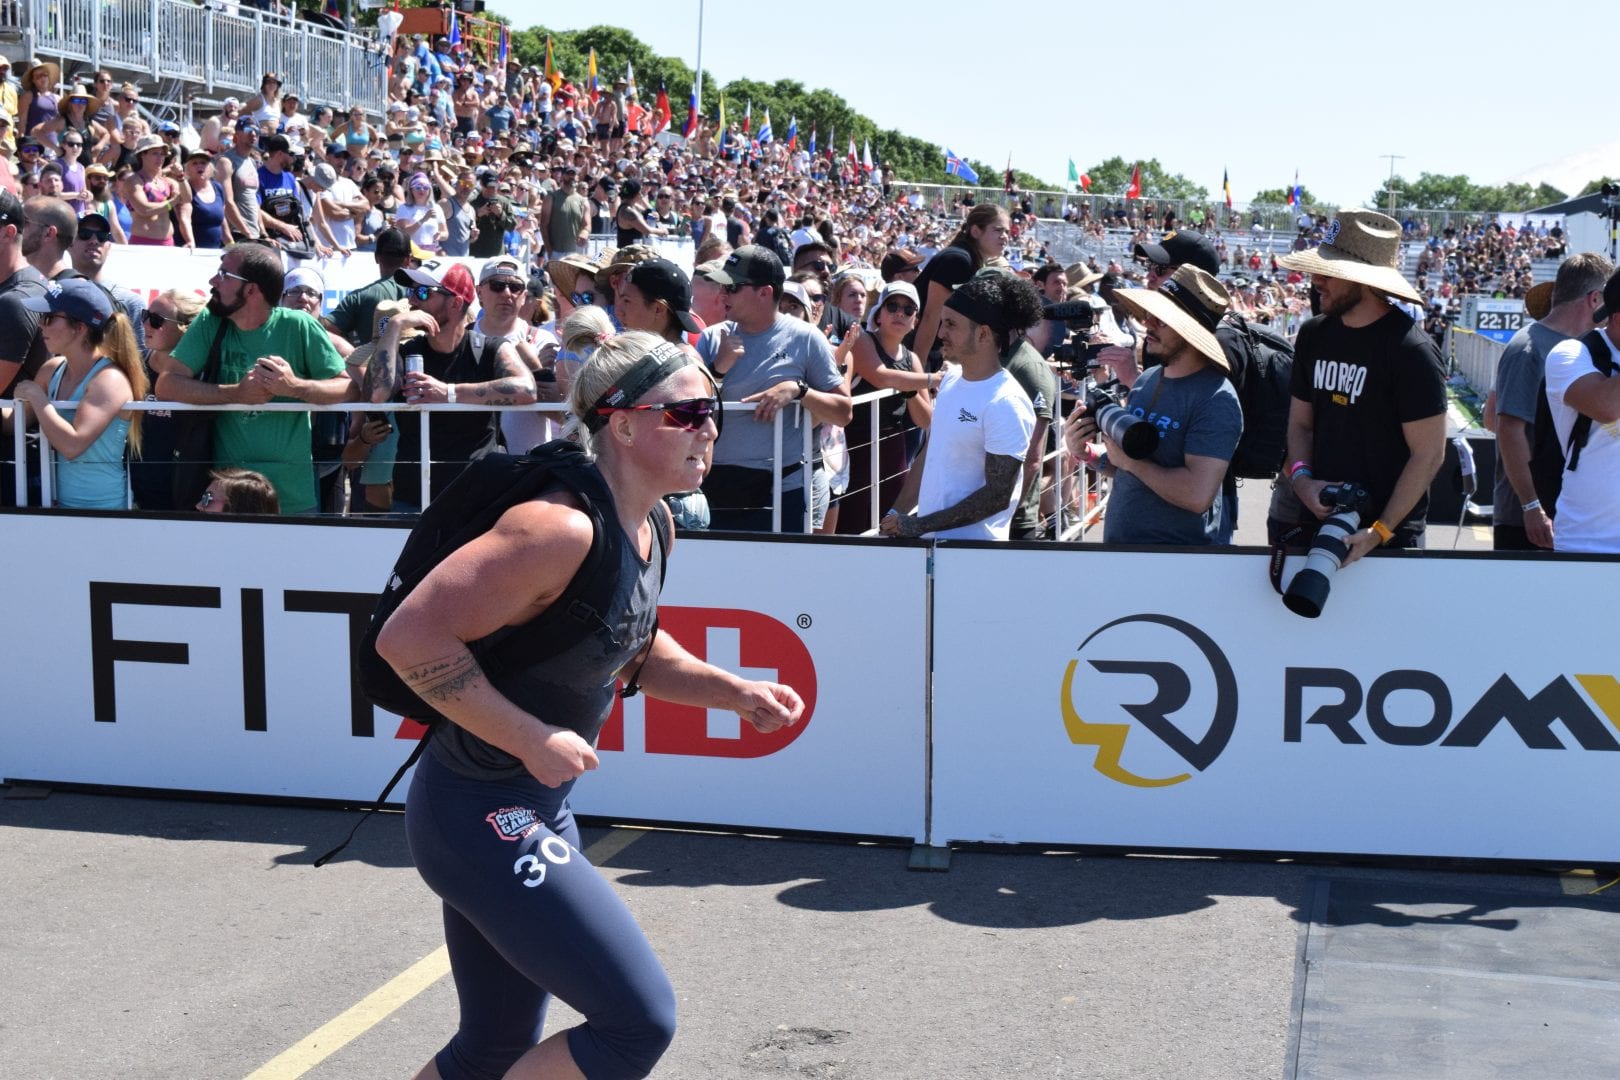 Emma Tall completes the Ruck Run event at the 2019 CrossFit Games.